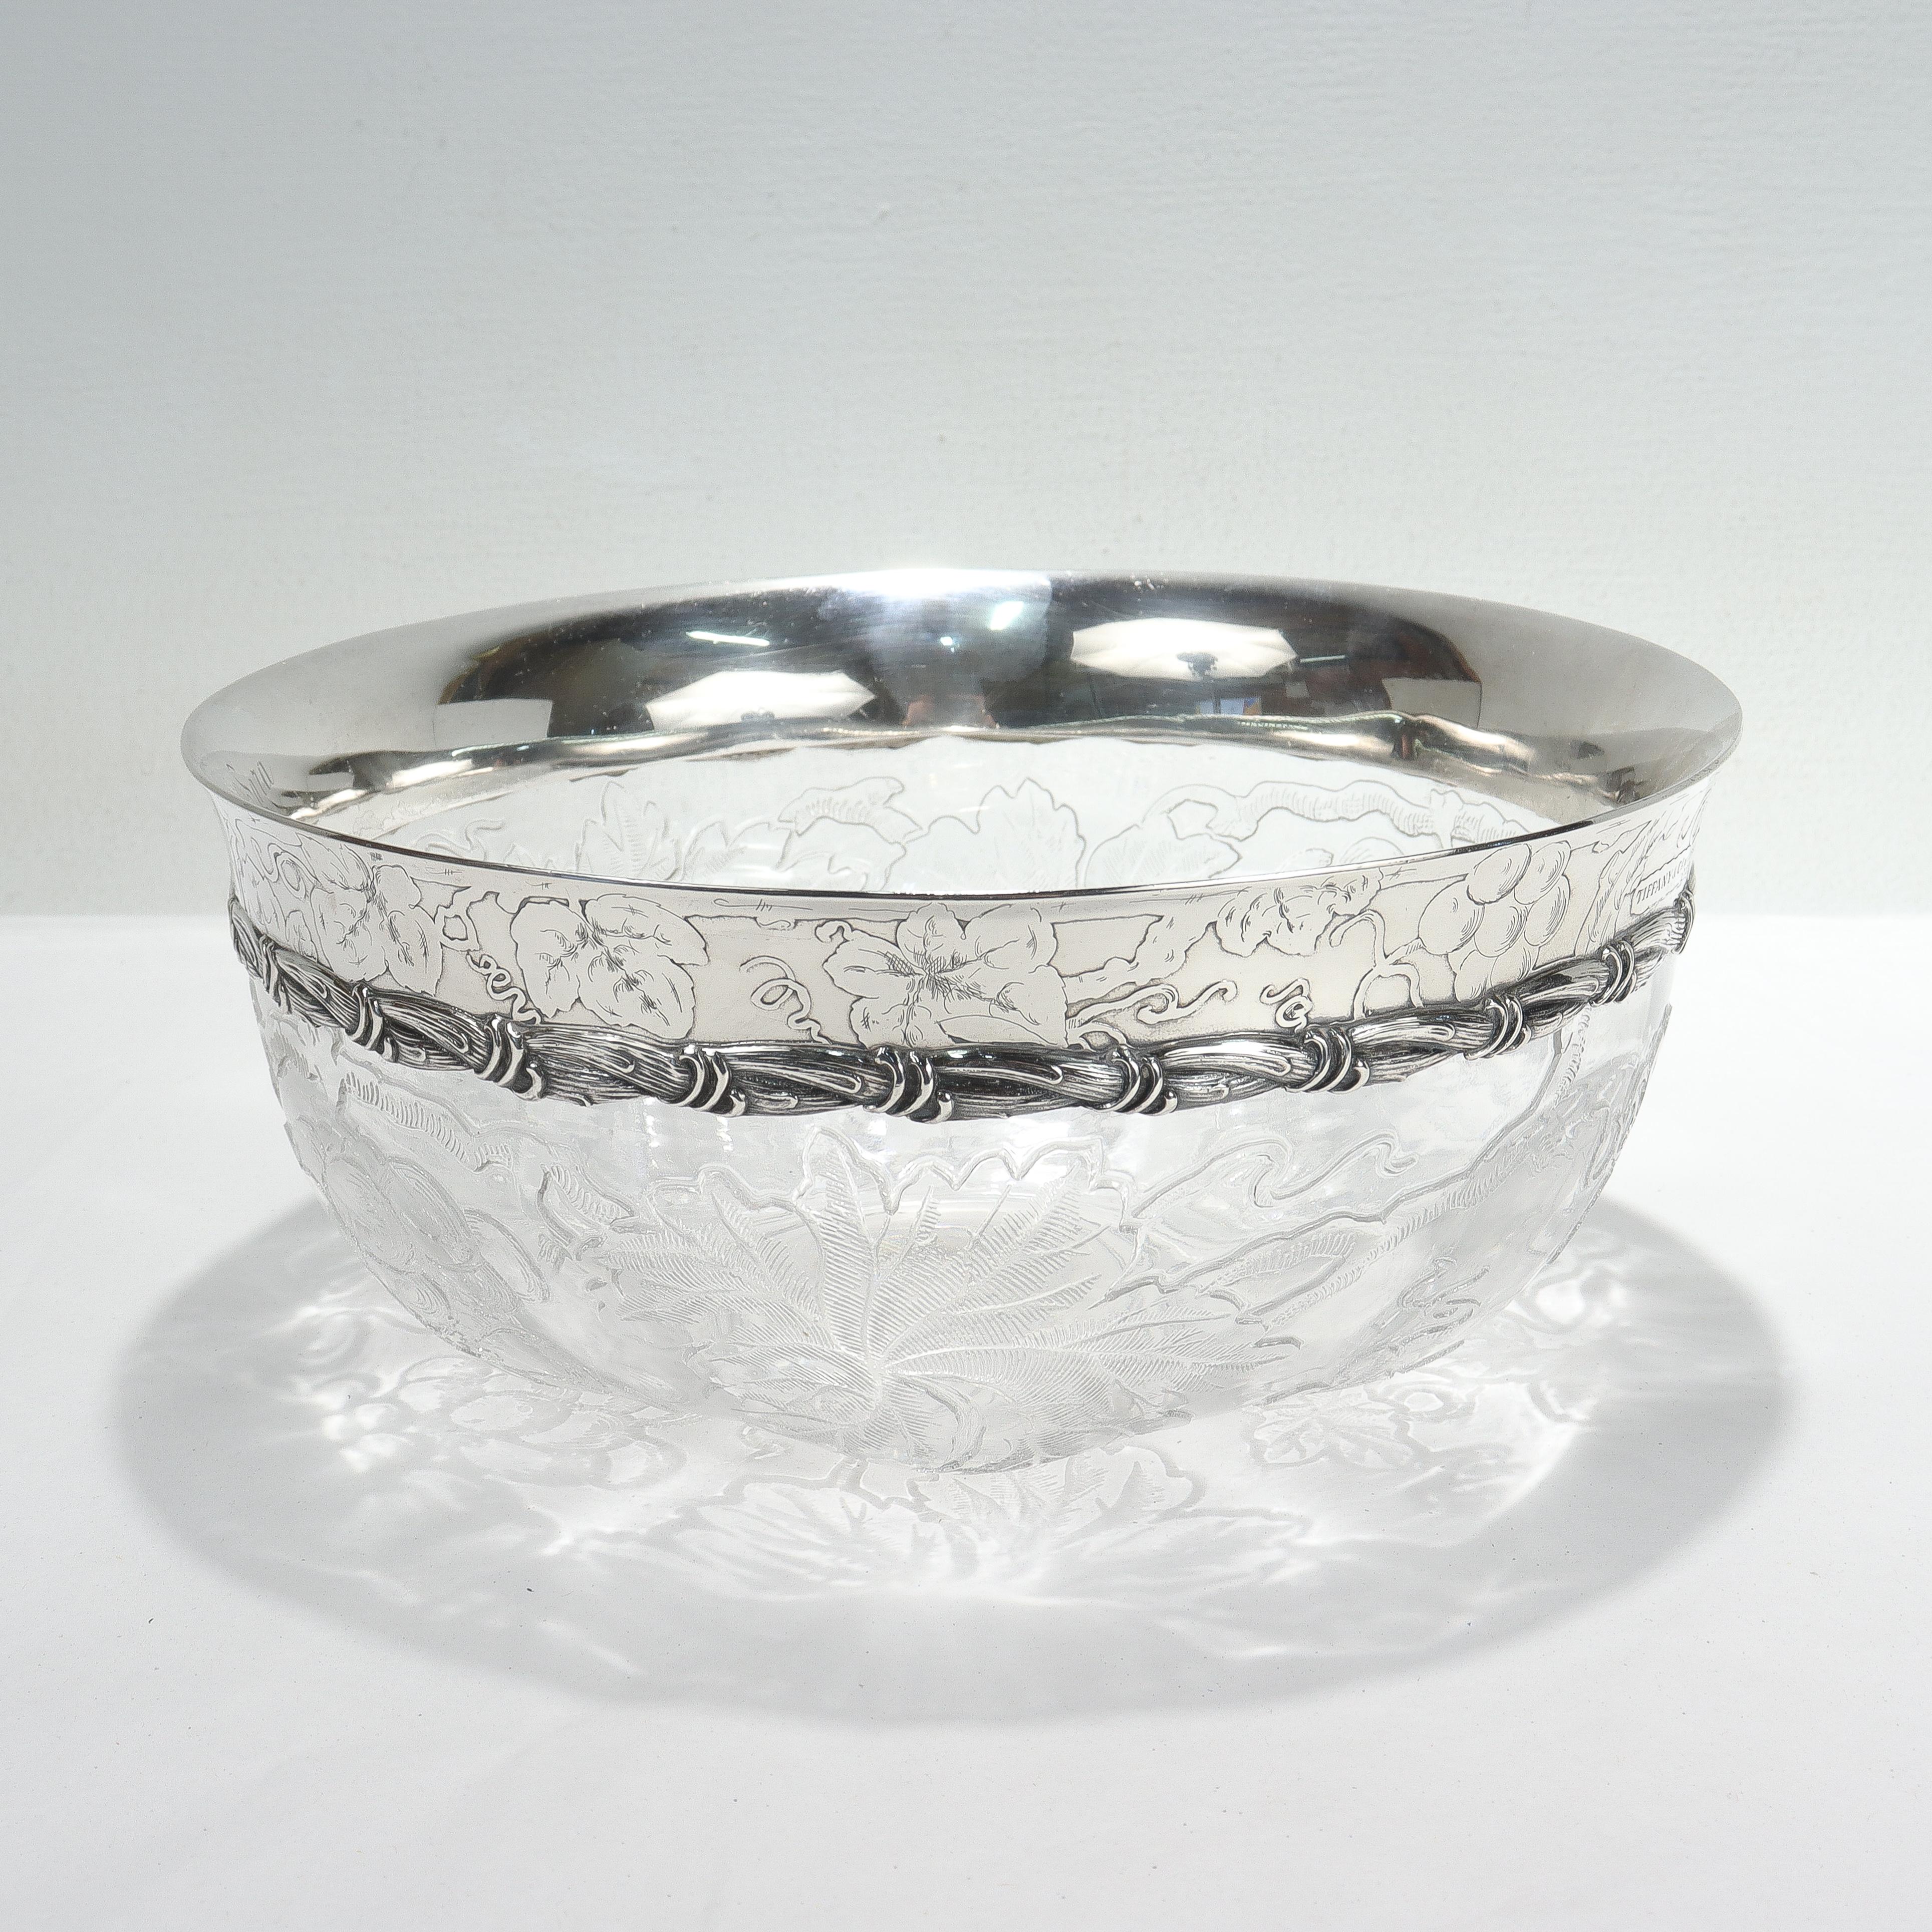 Antique Tiffany & Co. Sterling Silver Mounted 'Rock Crystal' Cut Glass Bowl 1